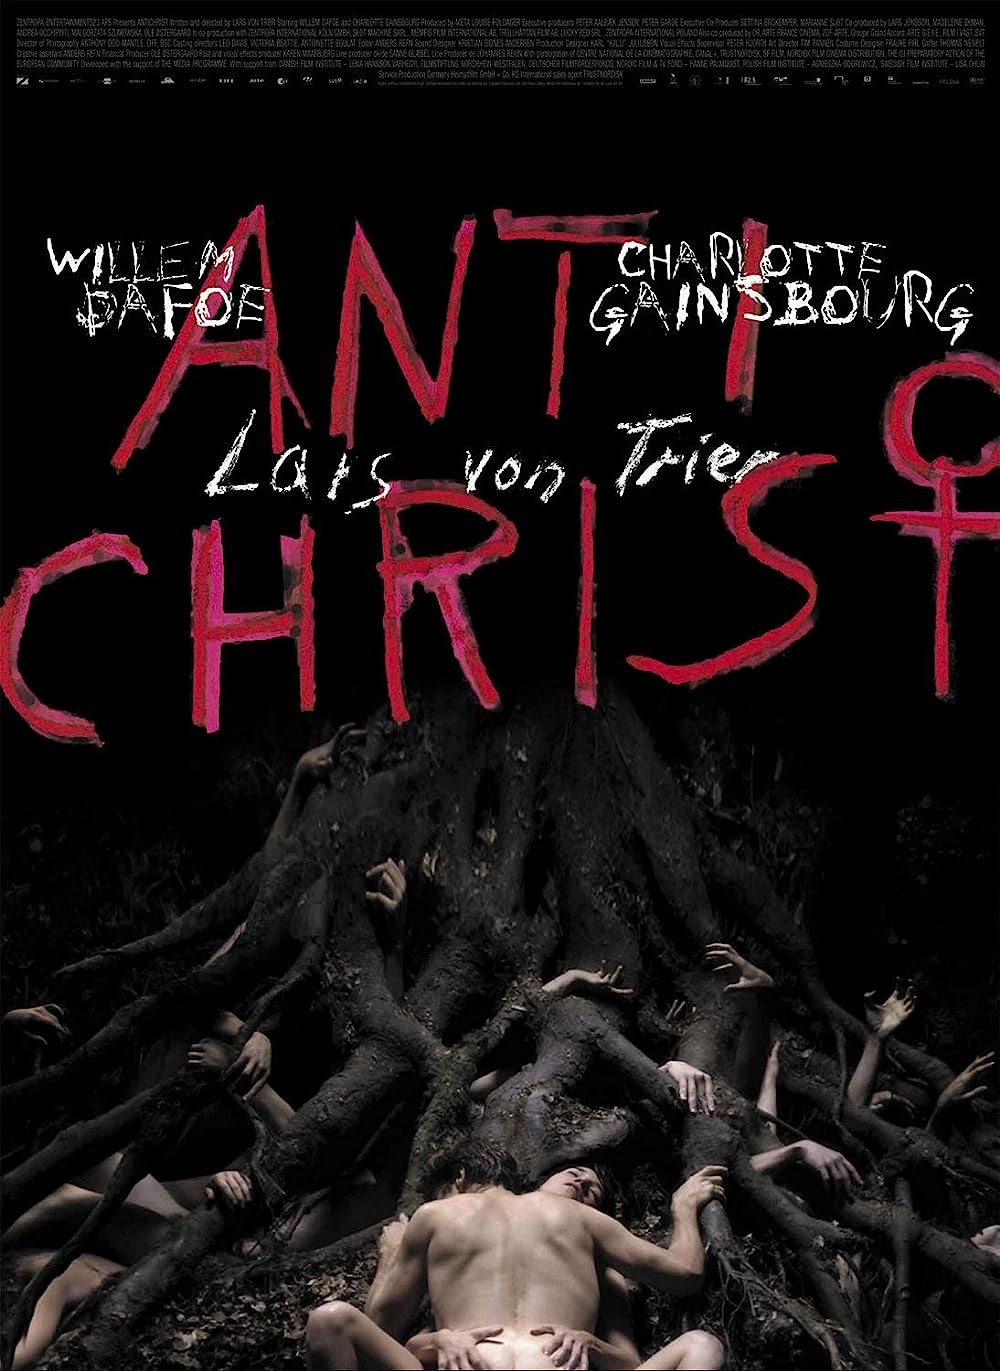 [18+] Antichrist (2009) Unrated BluRay HD Full Movie ESubs